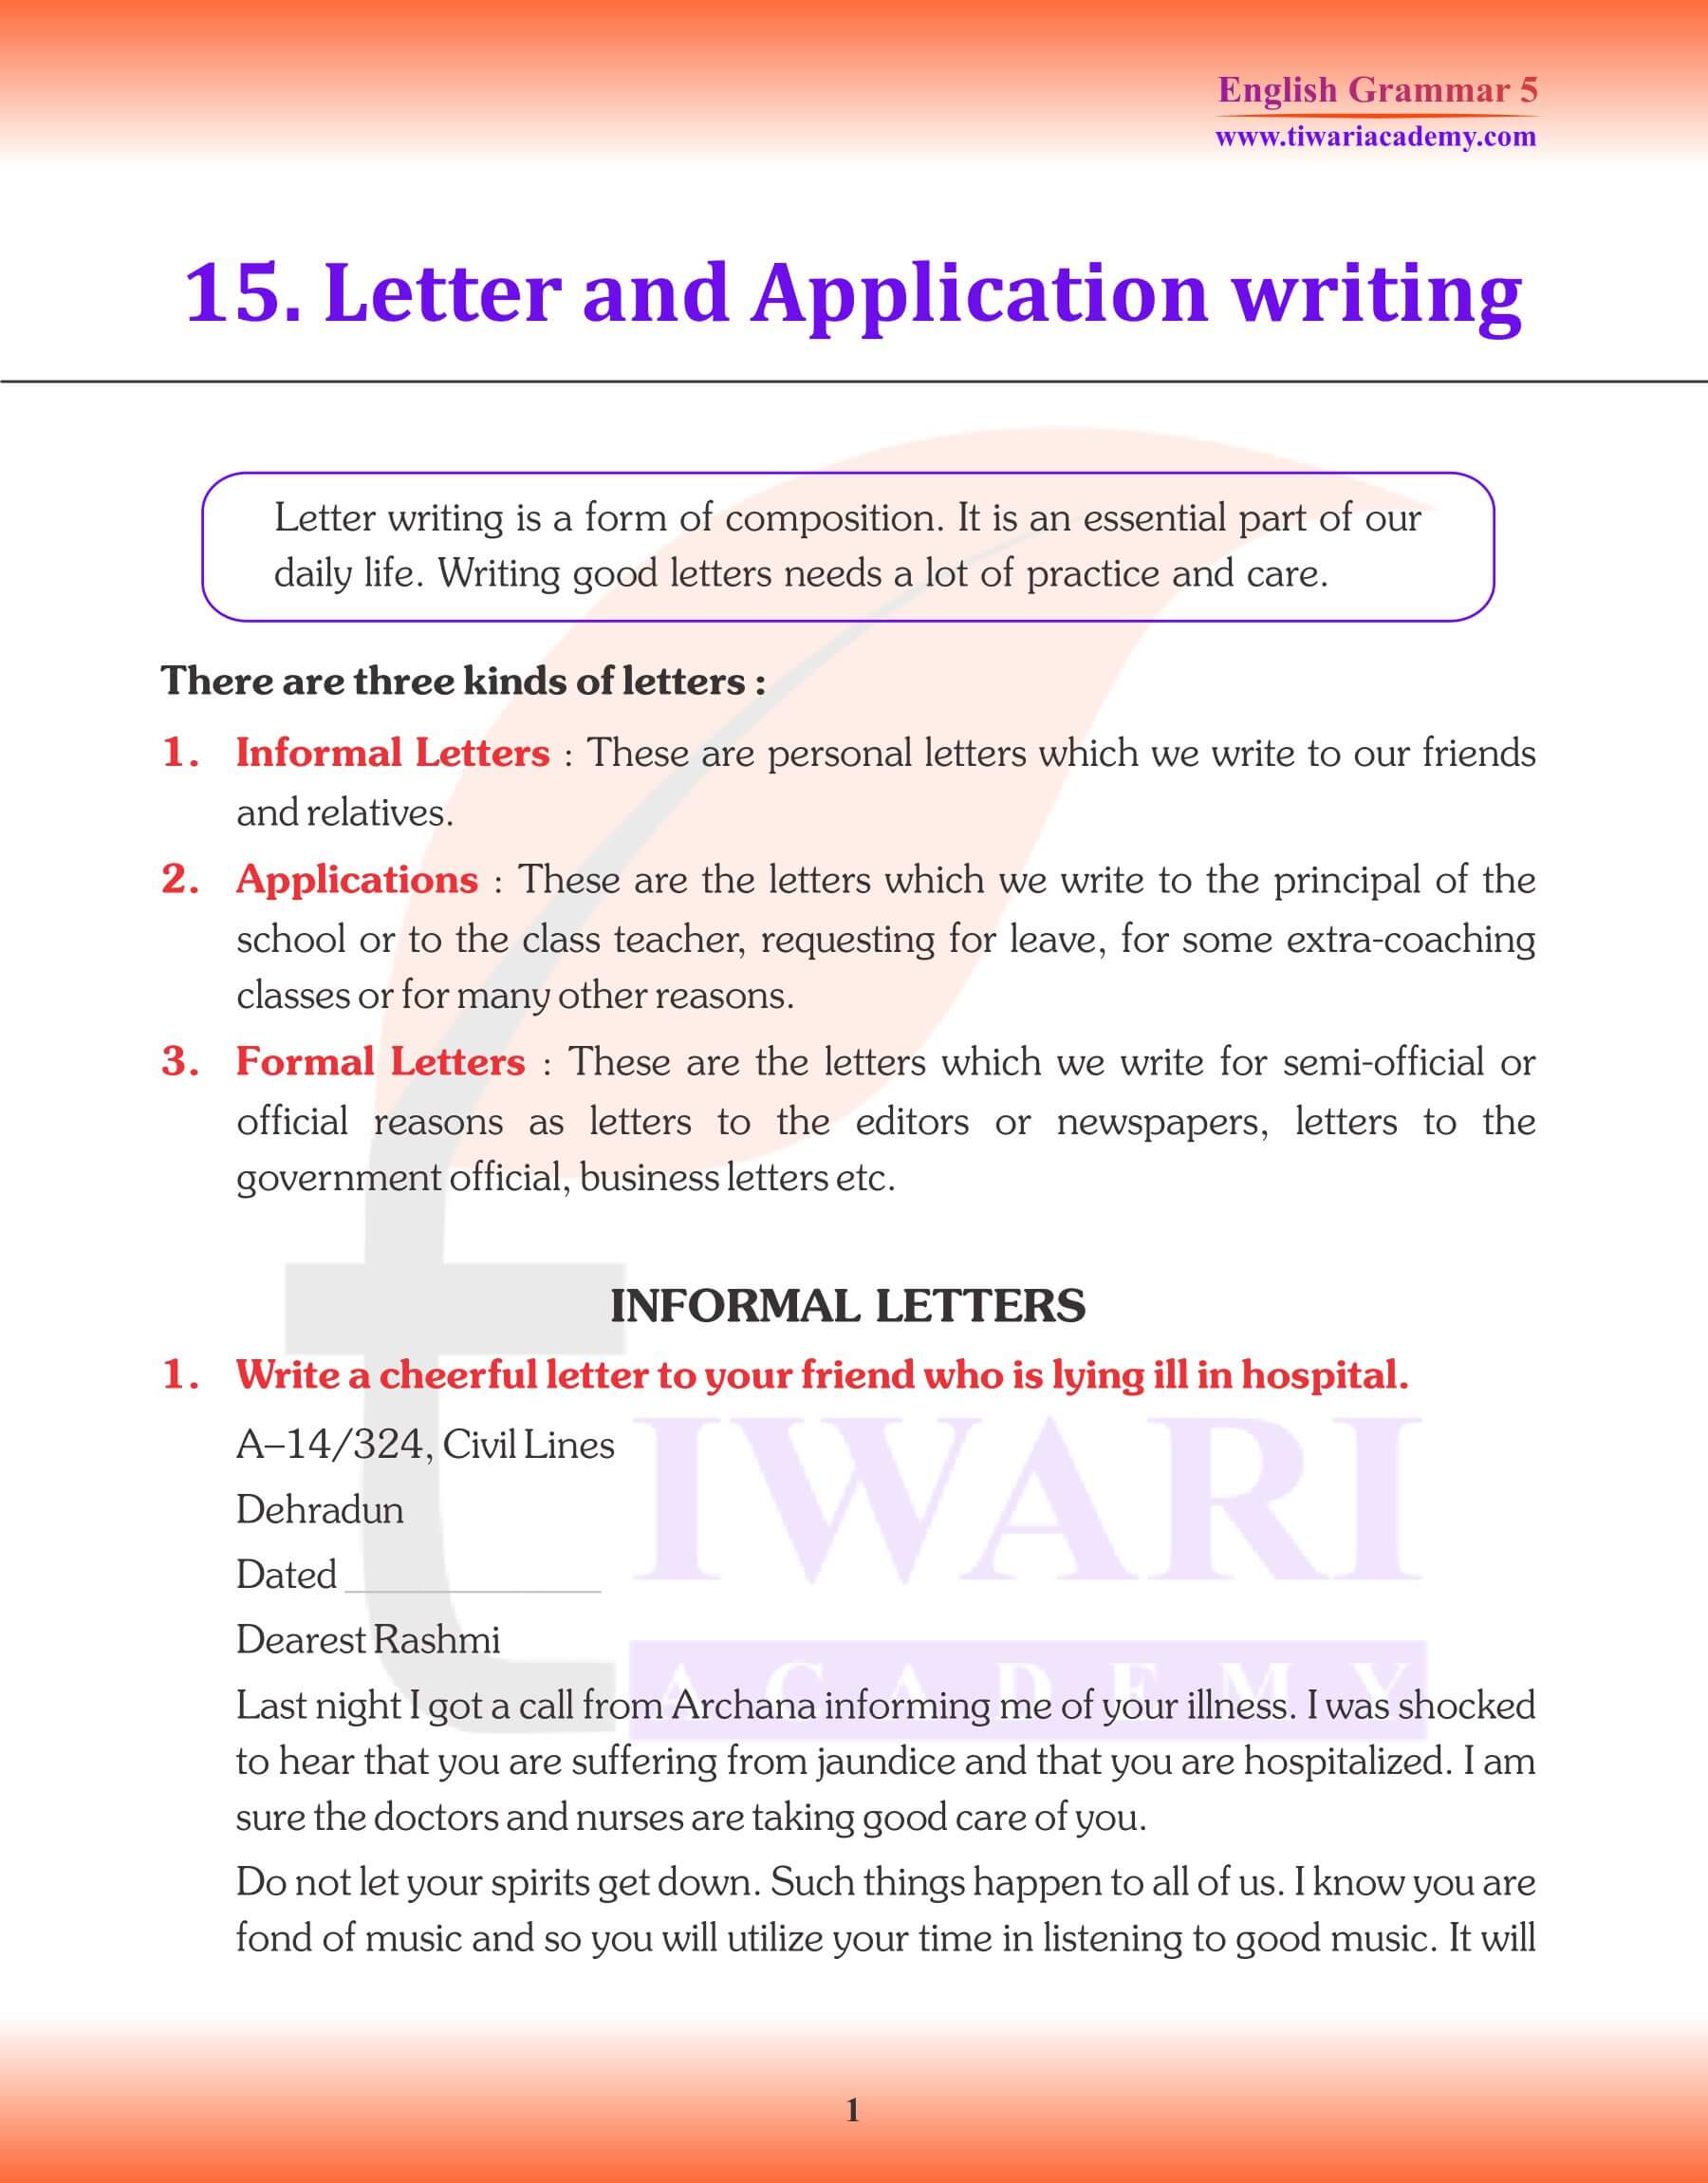 Class 5 English Grammar Letter and Application writing Revision Book